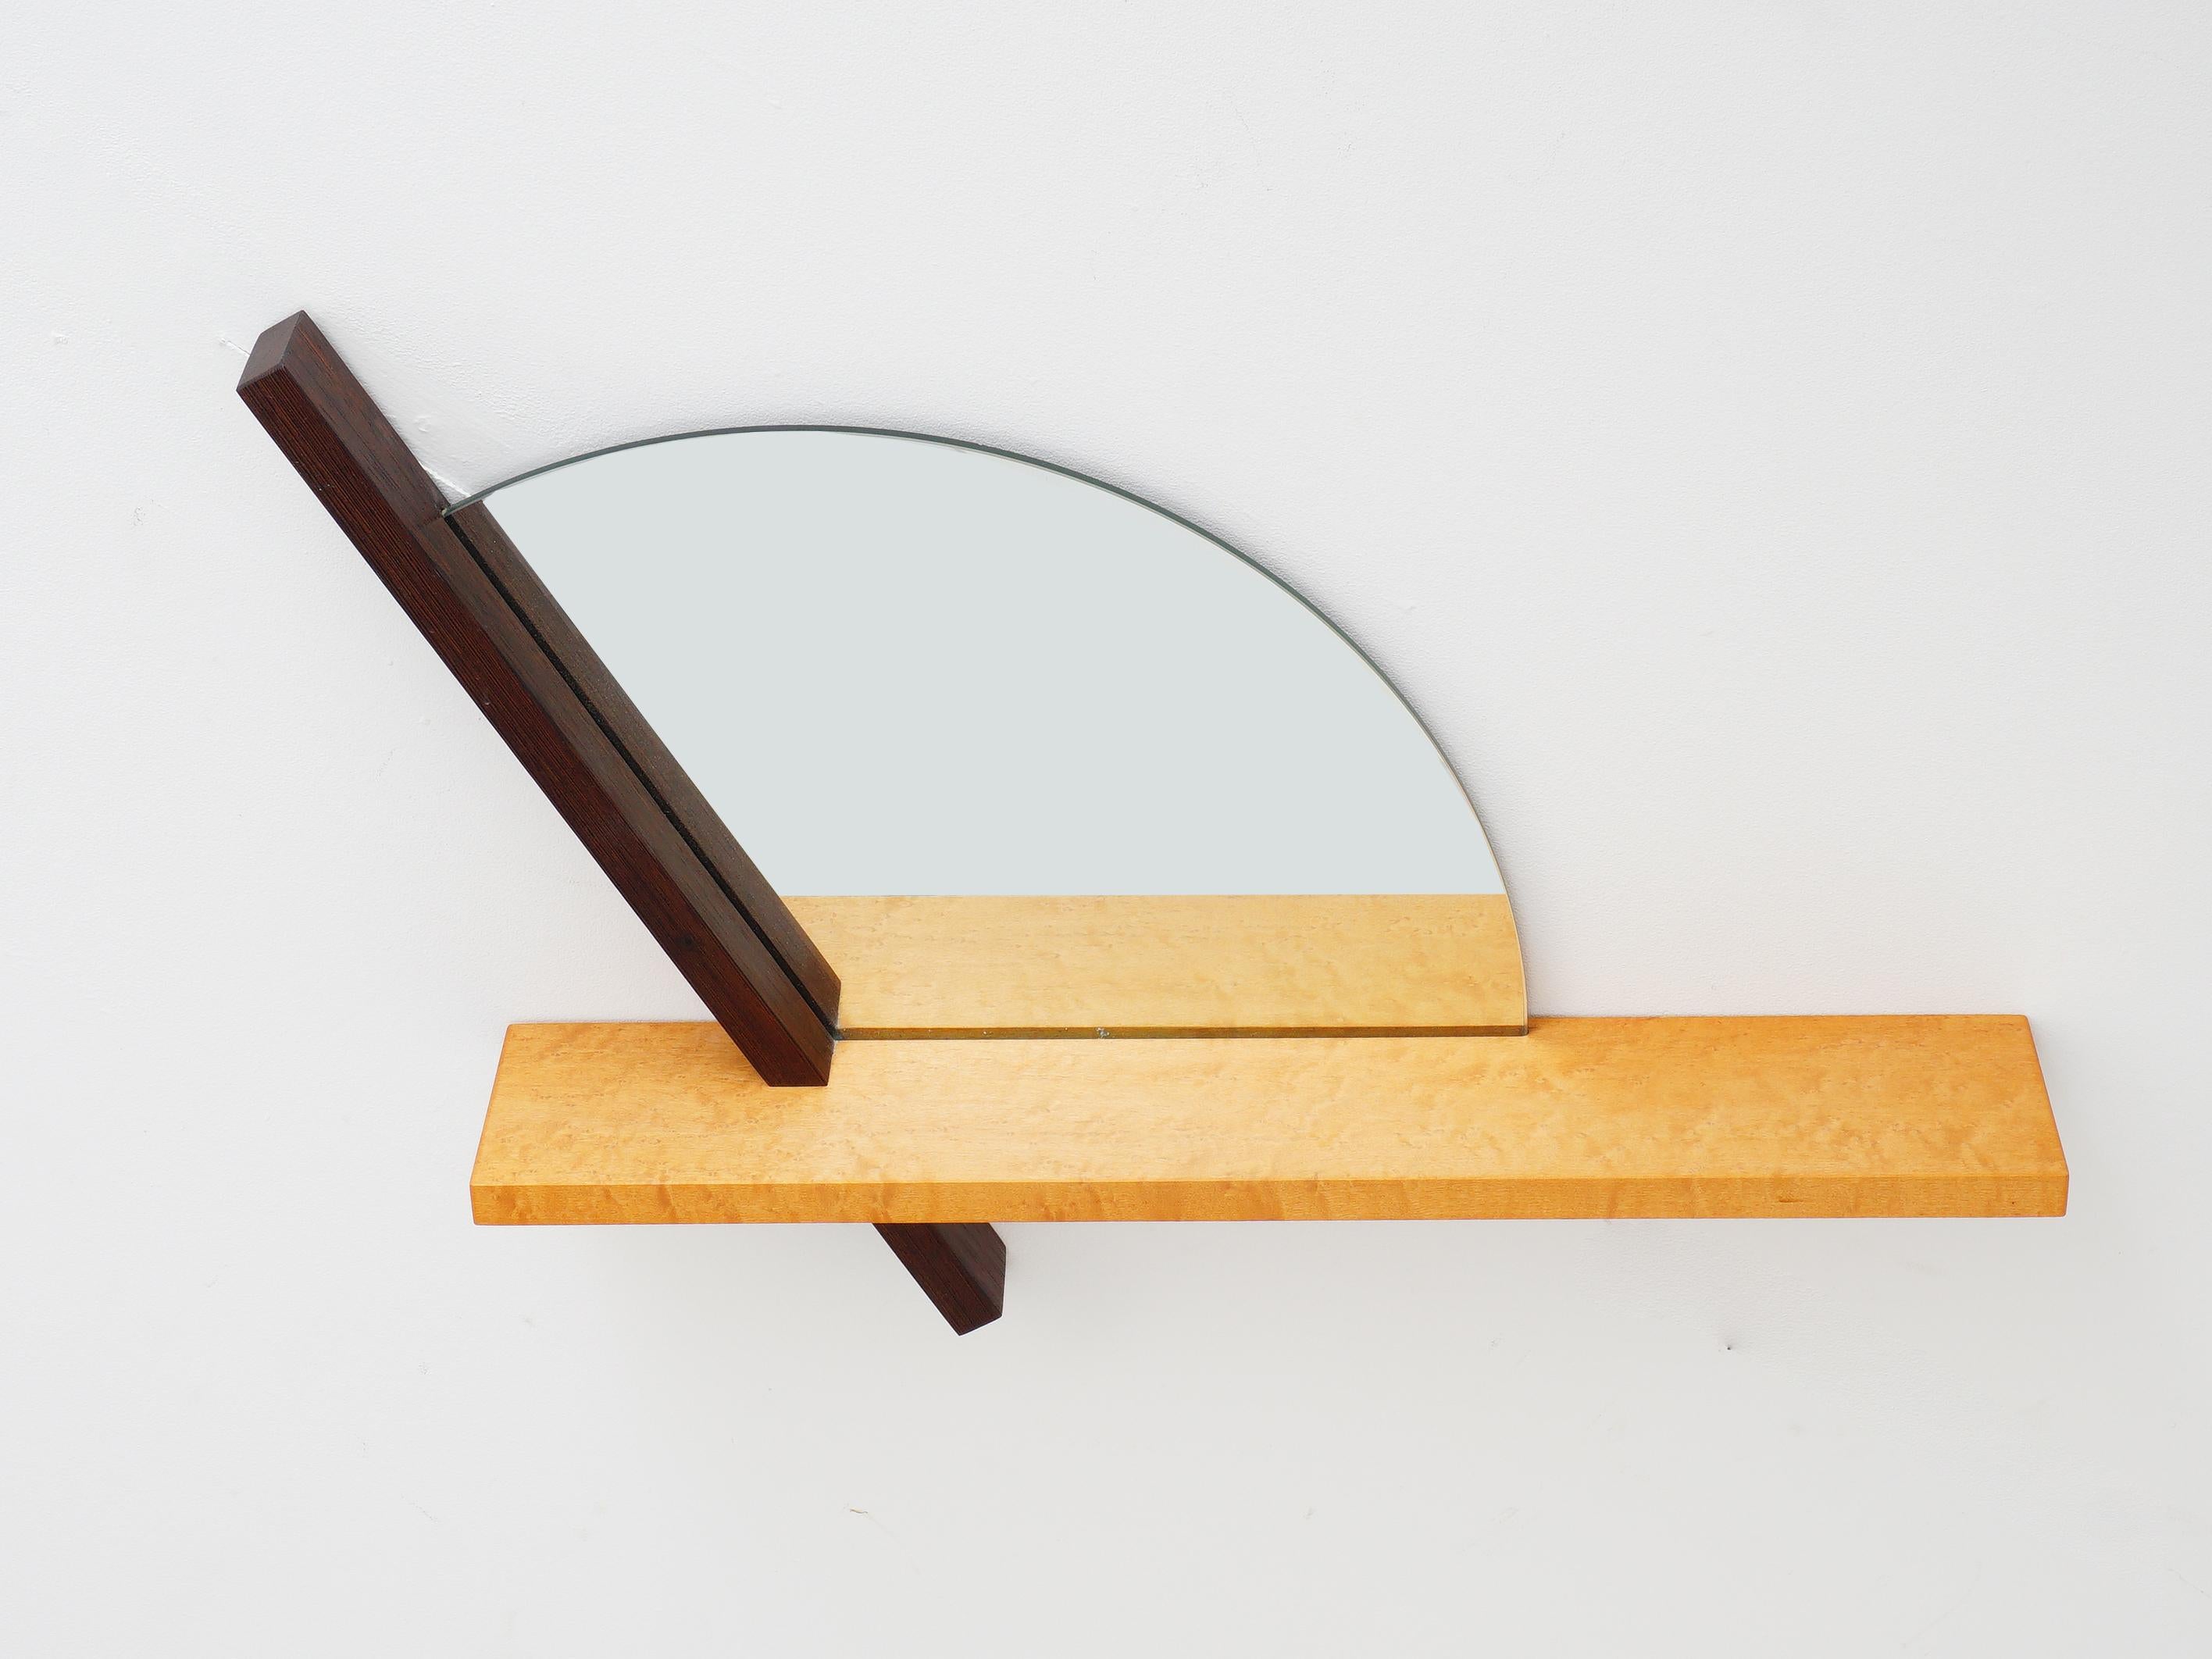 Richard Judd's 1980s mirrored wall shelf is a postmodern masterpiece, seamlessly combining form and function. This dual-purpose gem serves as both a striking wall mirror and a practical shelf, exuding contemporary flair. Its clean lines and mirrored